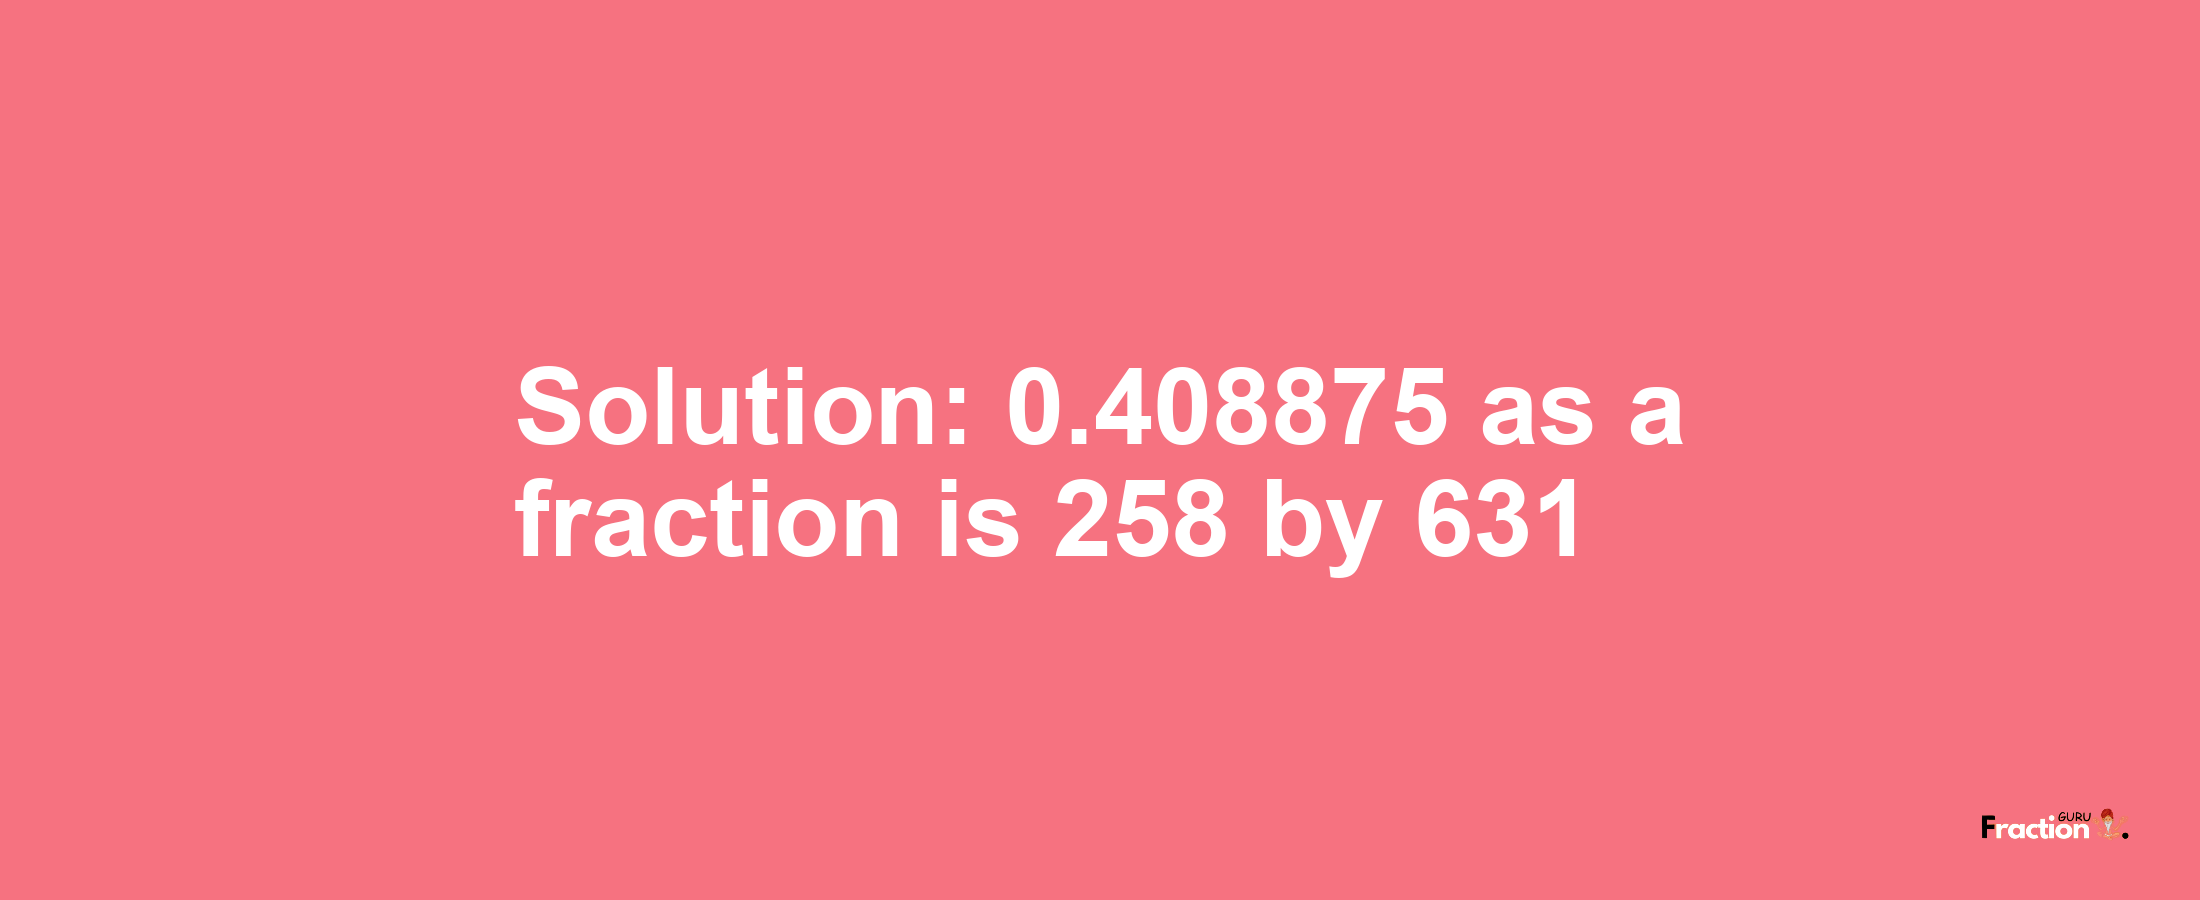 Solution:0.408875 as a fraction is 258/631